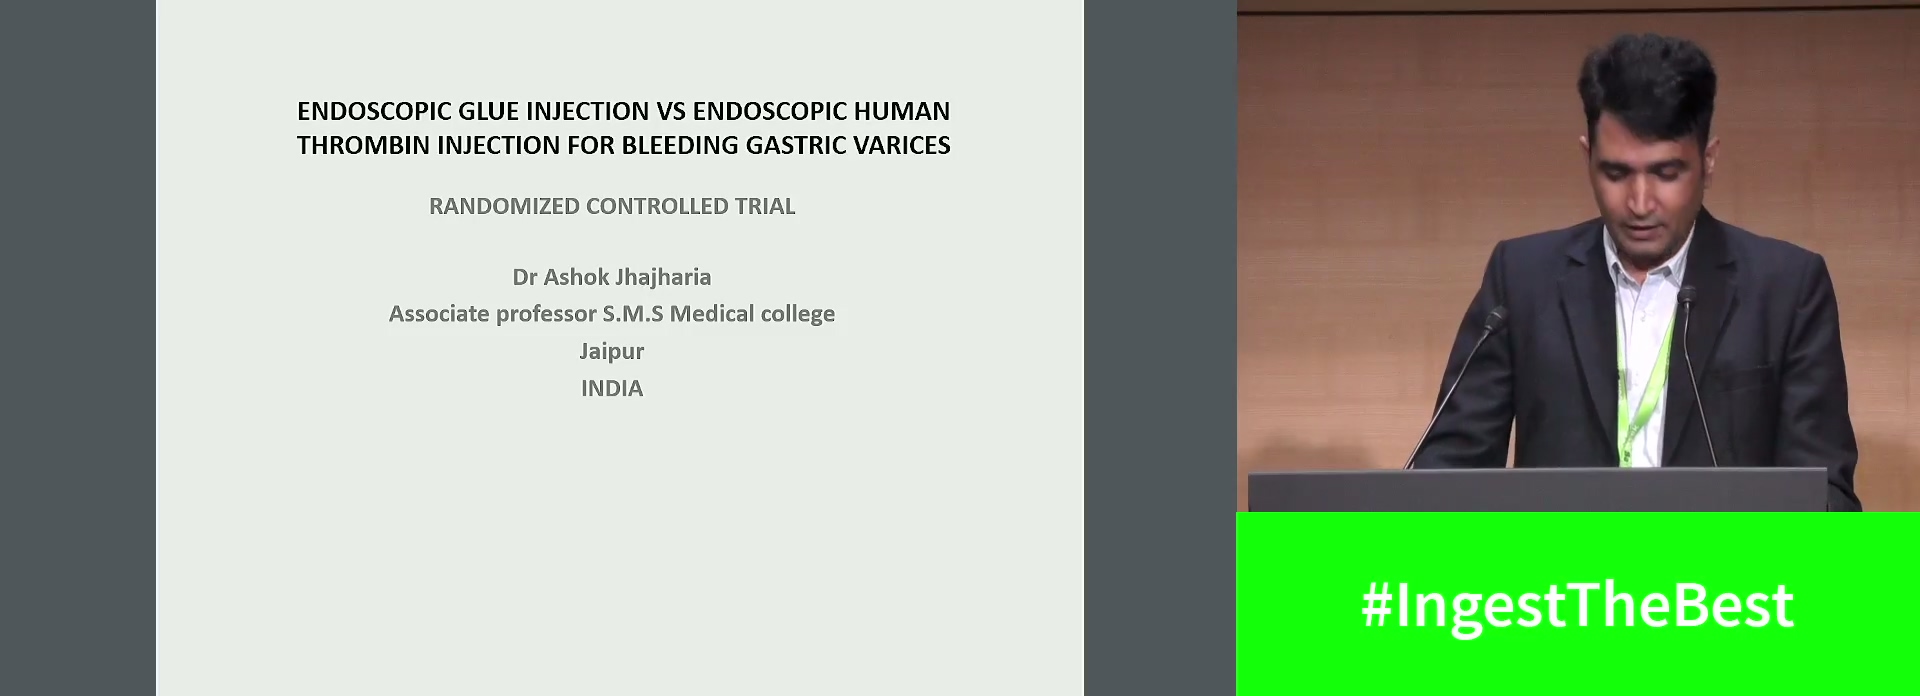 ENDOSCOPIC GLUE INJECTION VS ENDOSCOPIC HUMAN THROMBIN INJECTION FOR BLEEDING GASTRIC VARICES – A RANDOMIZED CONTROLLED TRIAL